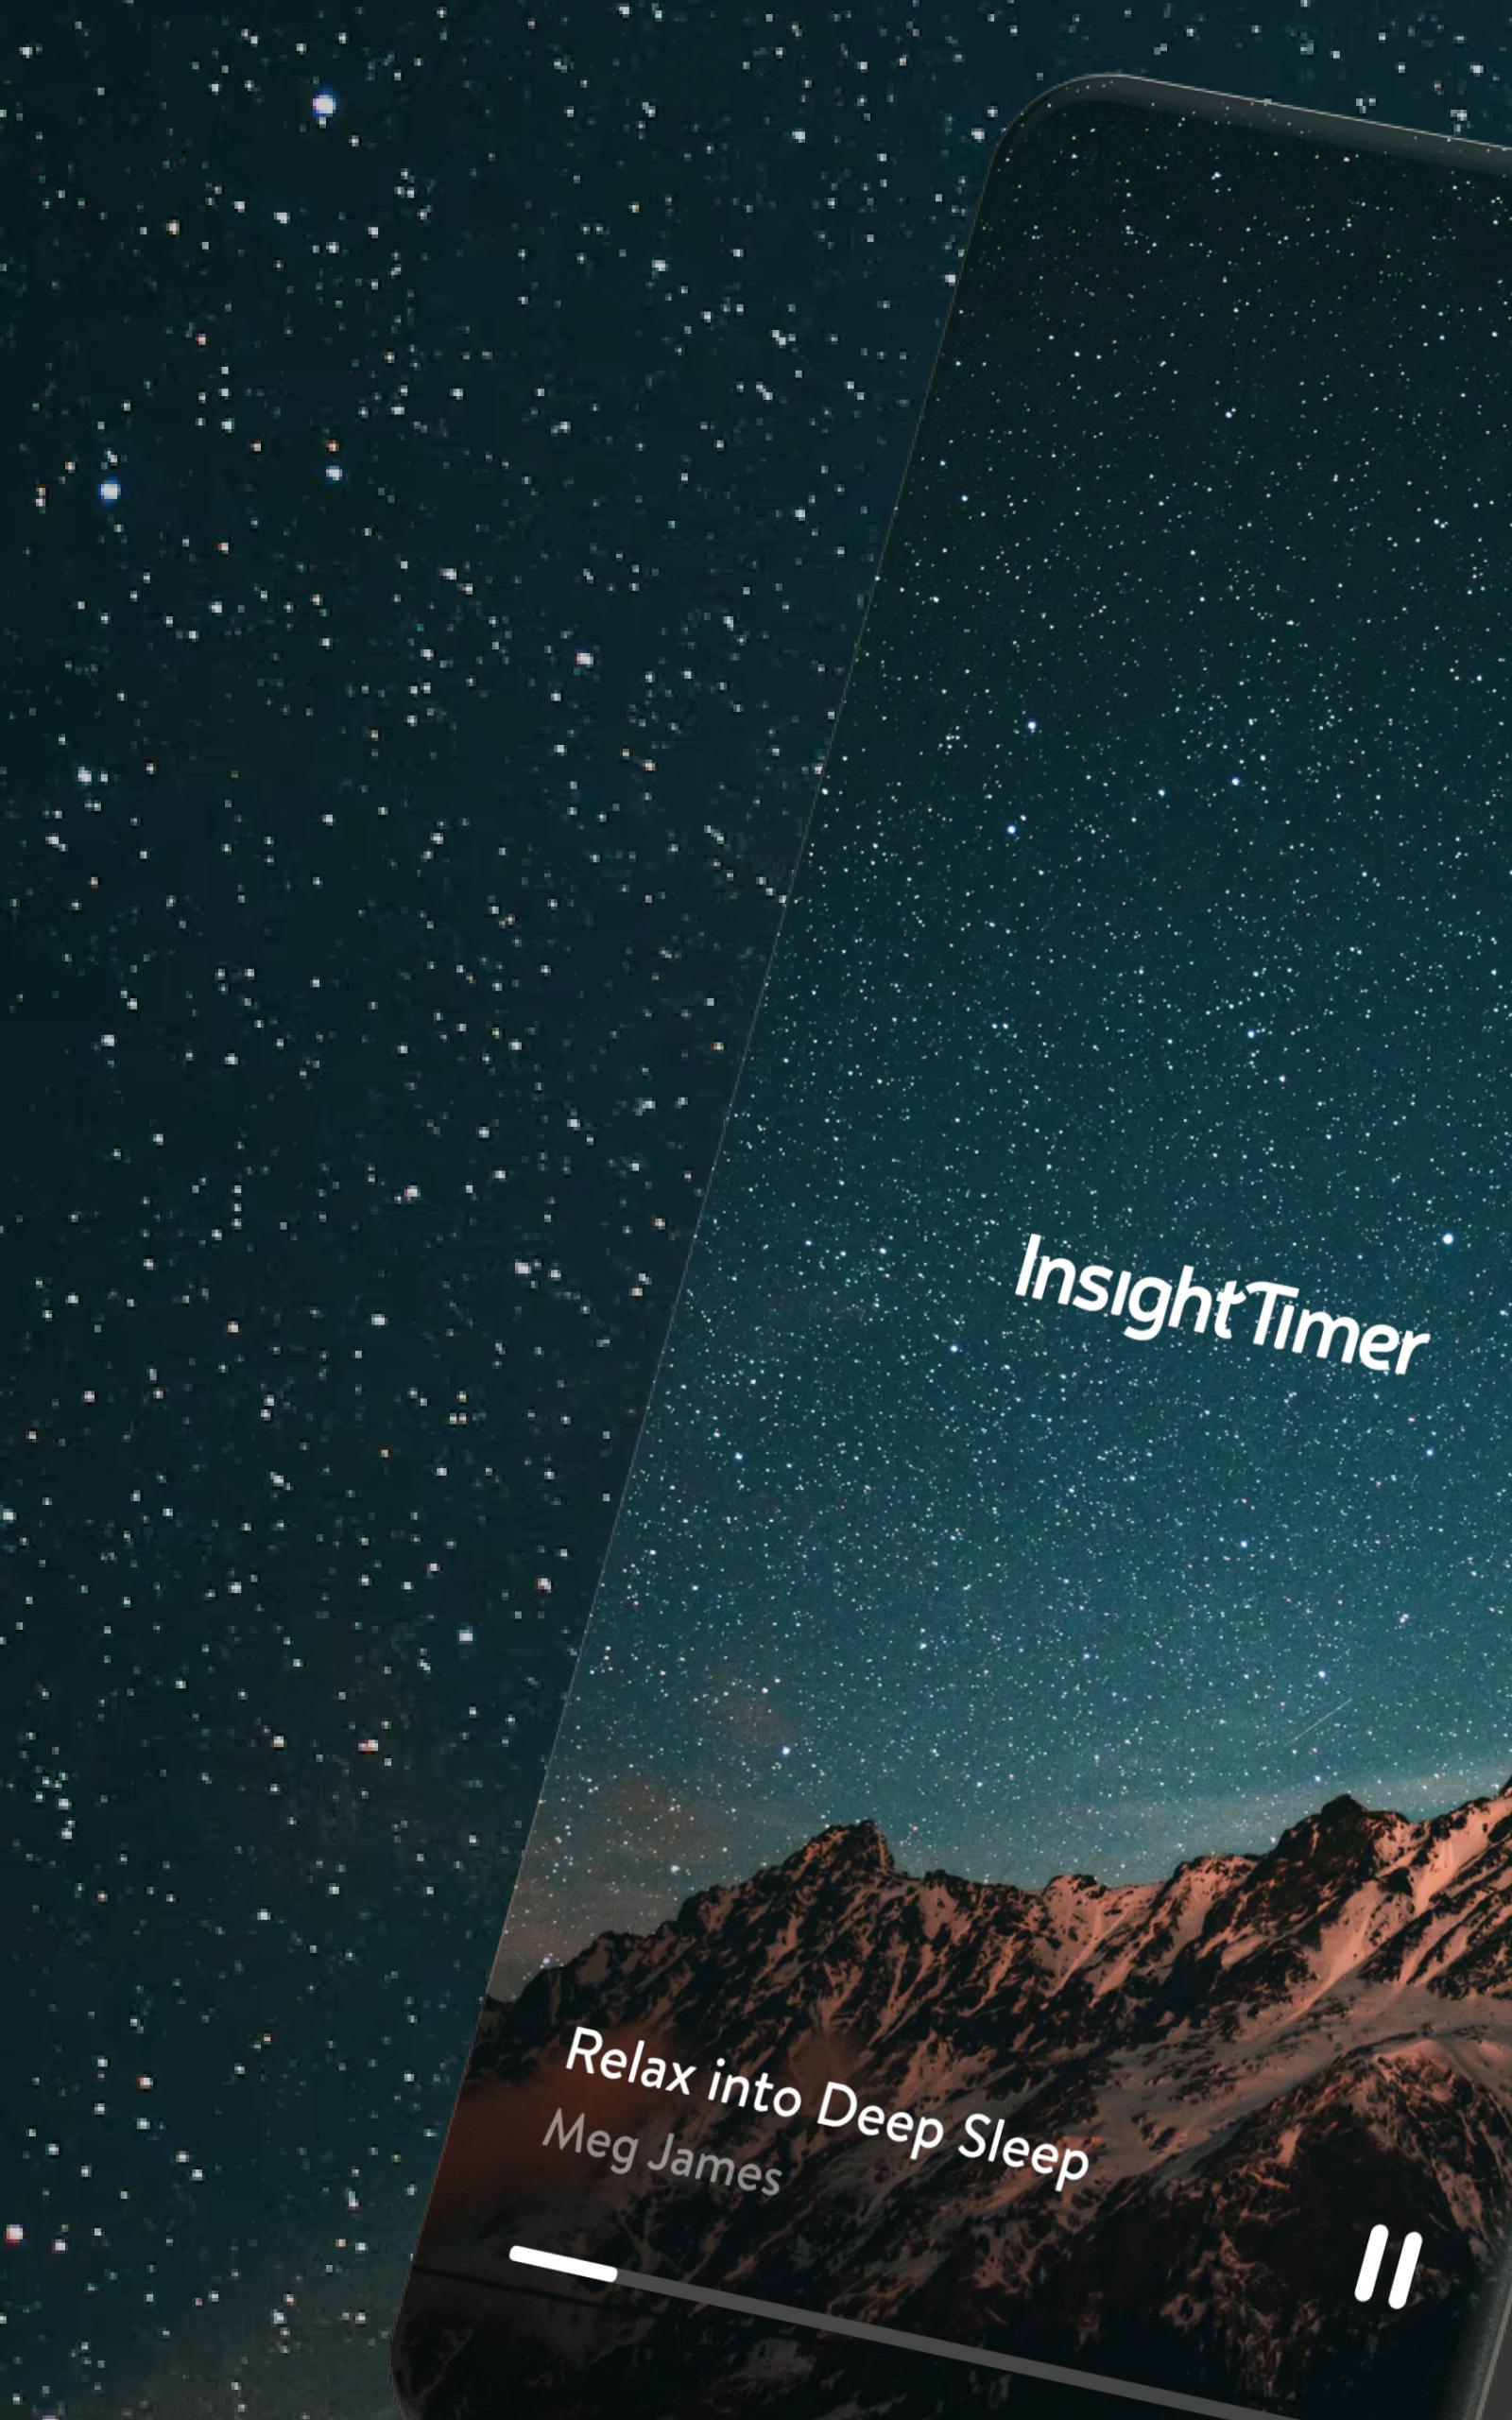 Insight Timer for Android - APK Download